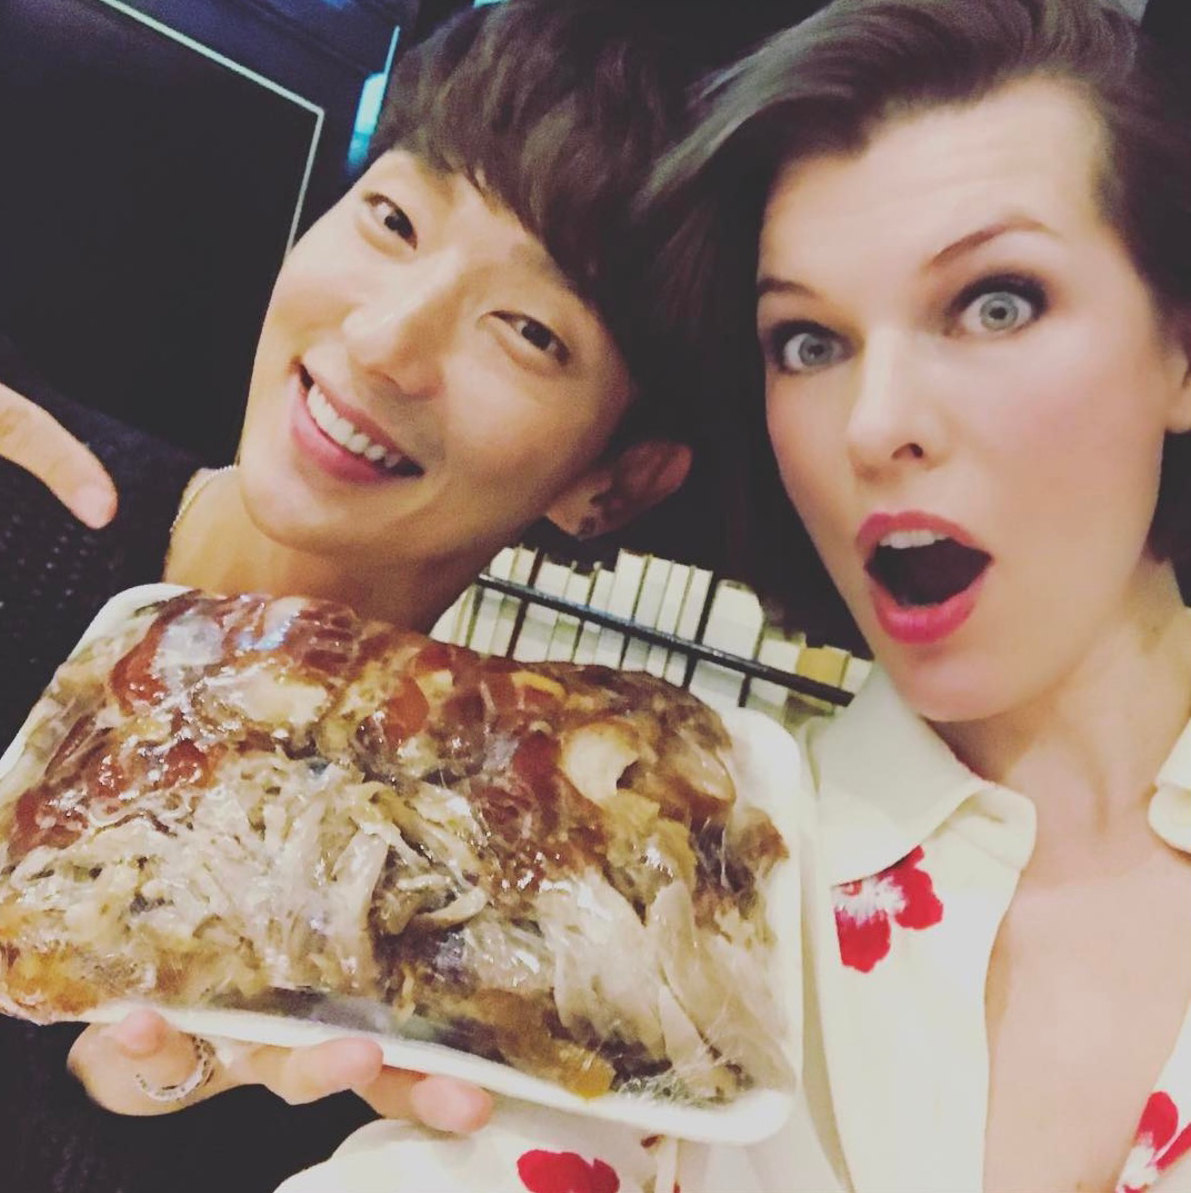 Fans Notice Lee Joon Gi and Milla Jovovich's Chemistry While They